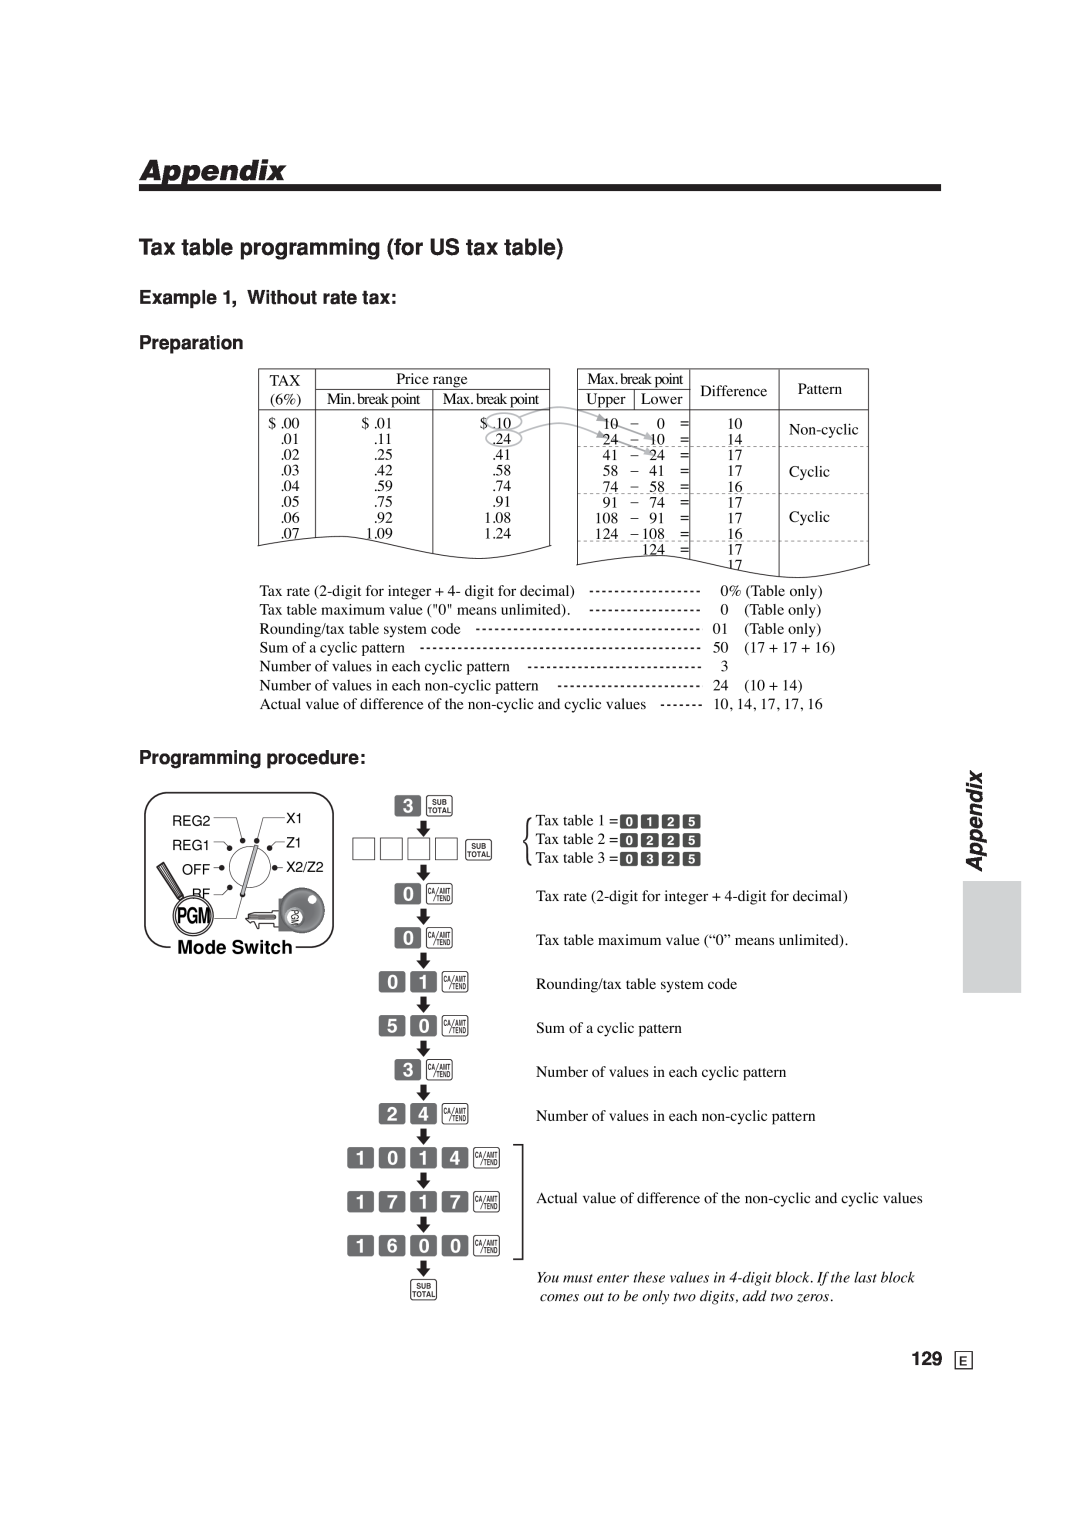 Casio SE-C6000 Appendix, Tax table programming for US tax table, Example 1, Without rate tax Preparation, Mode Switch 